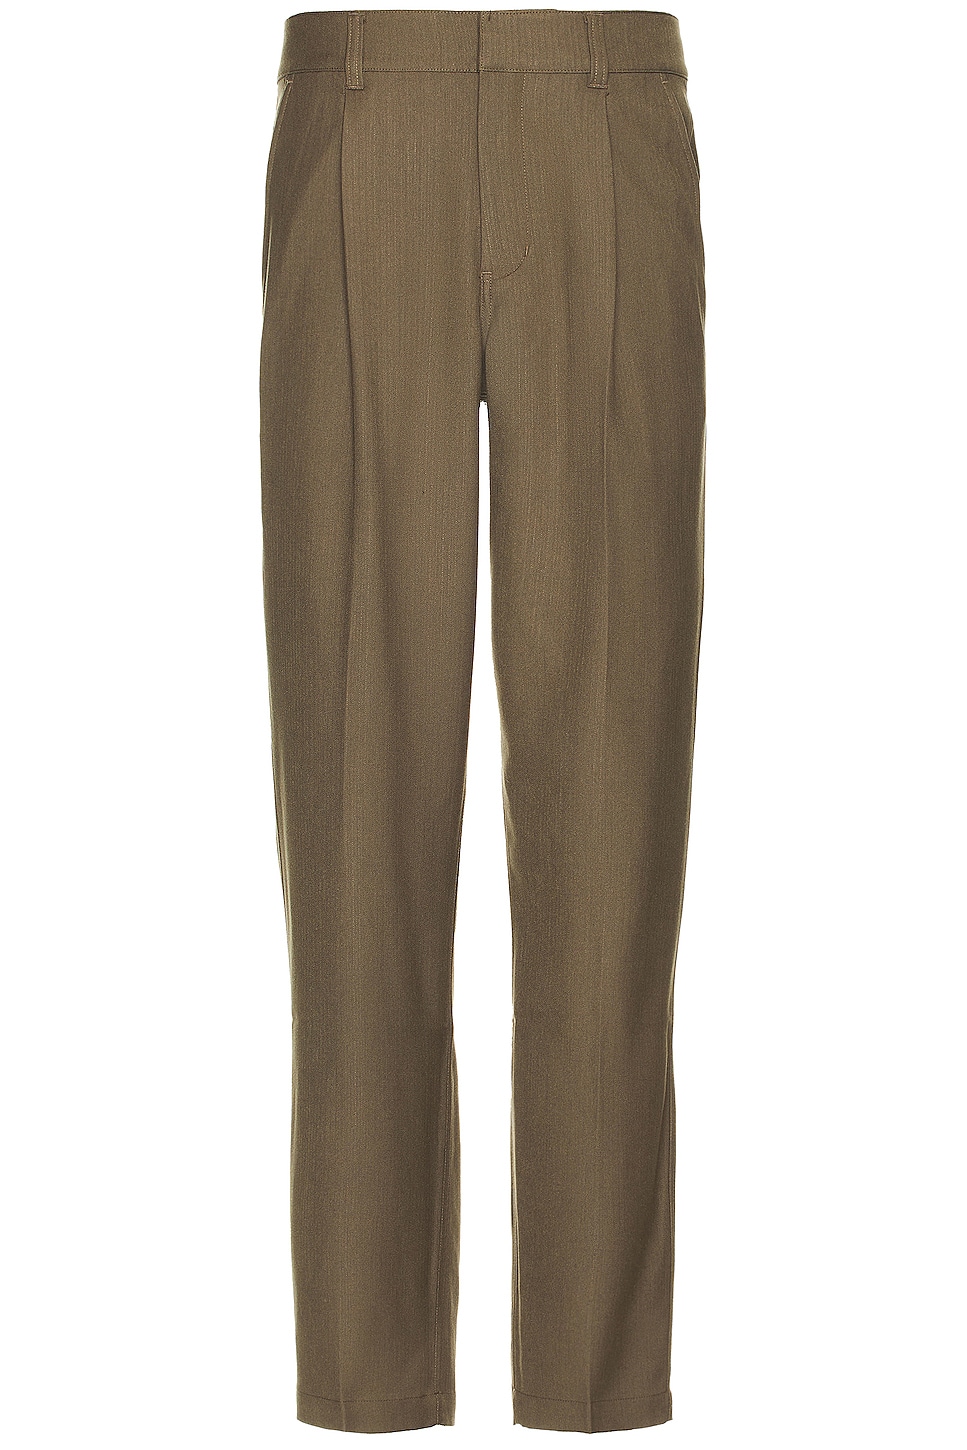 Image 1 of SATURDAYS NYC George Suit Trouser in Bungee